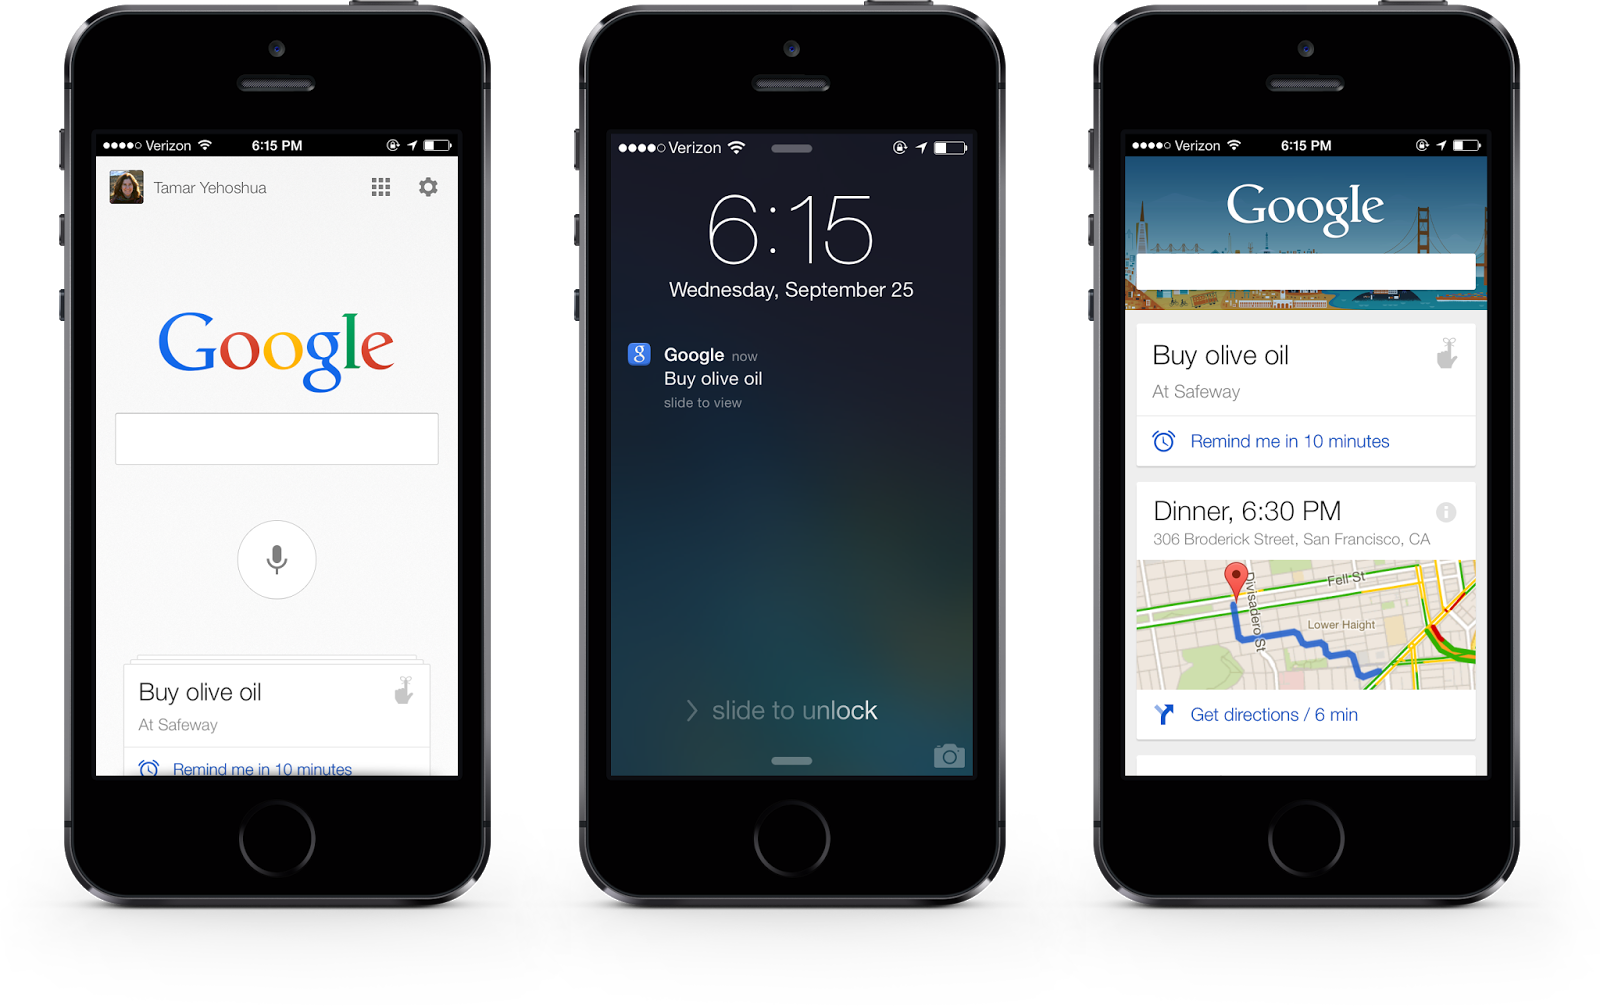 google turns 15 celebrates with updates to google search and ios search app image 1